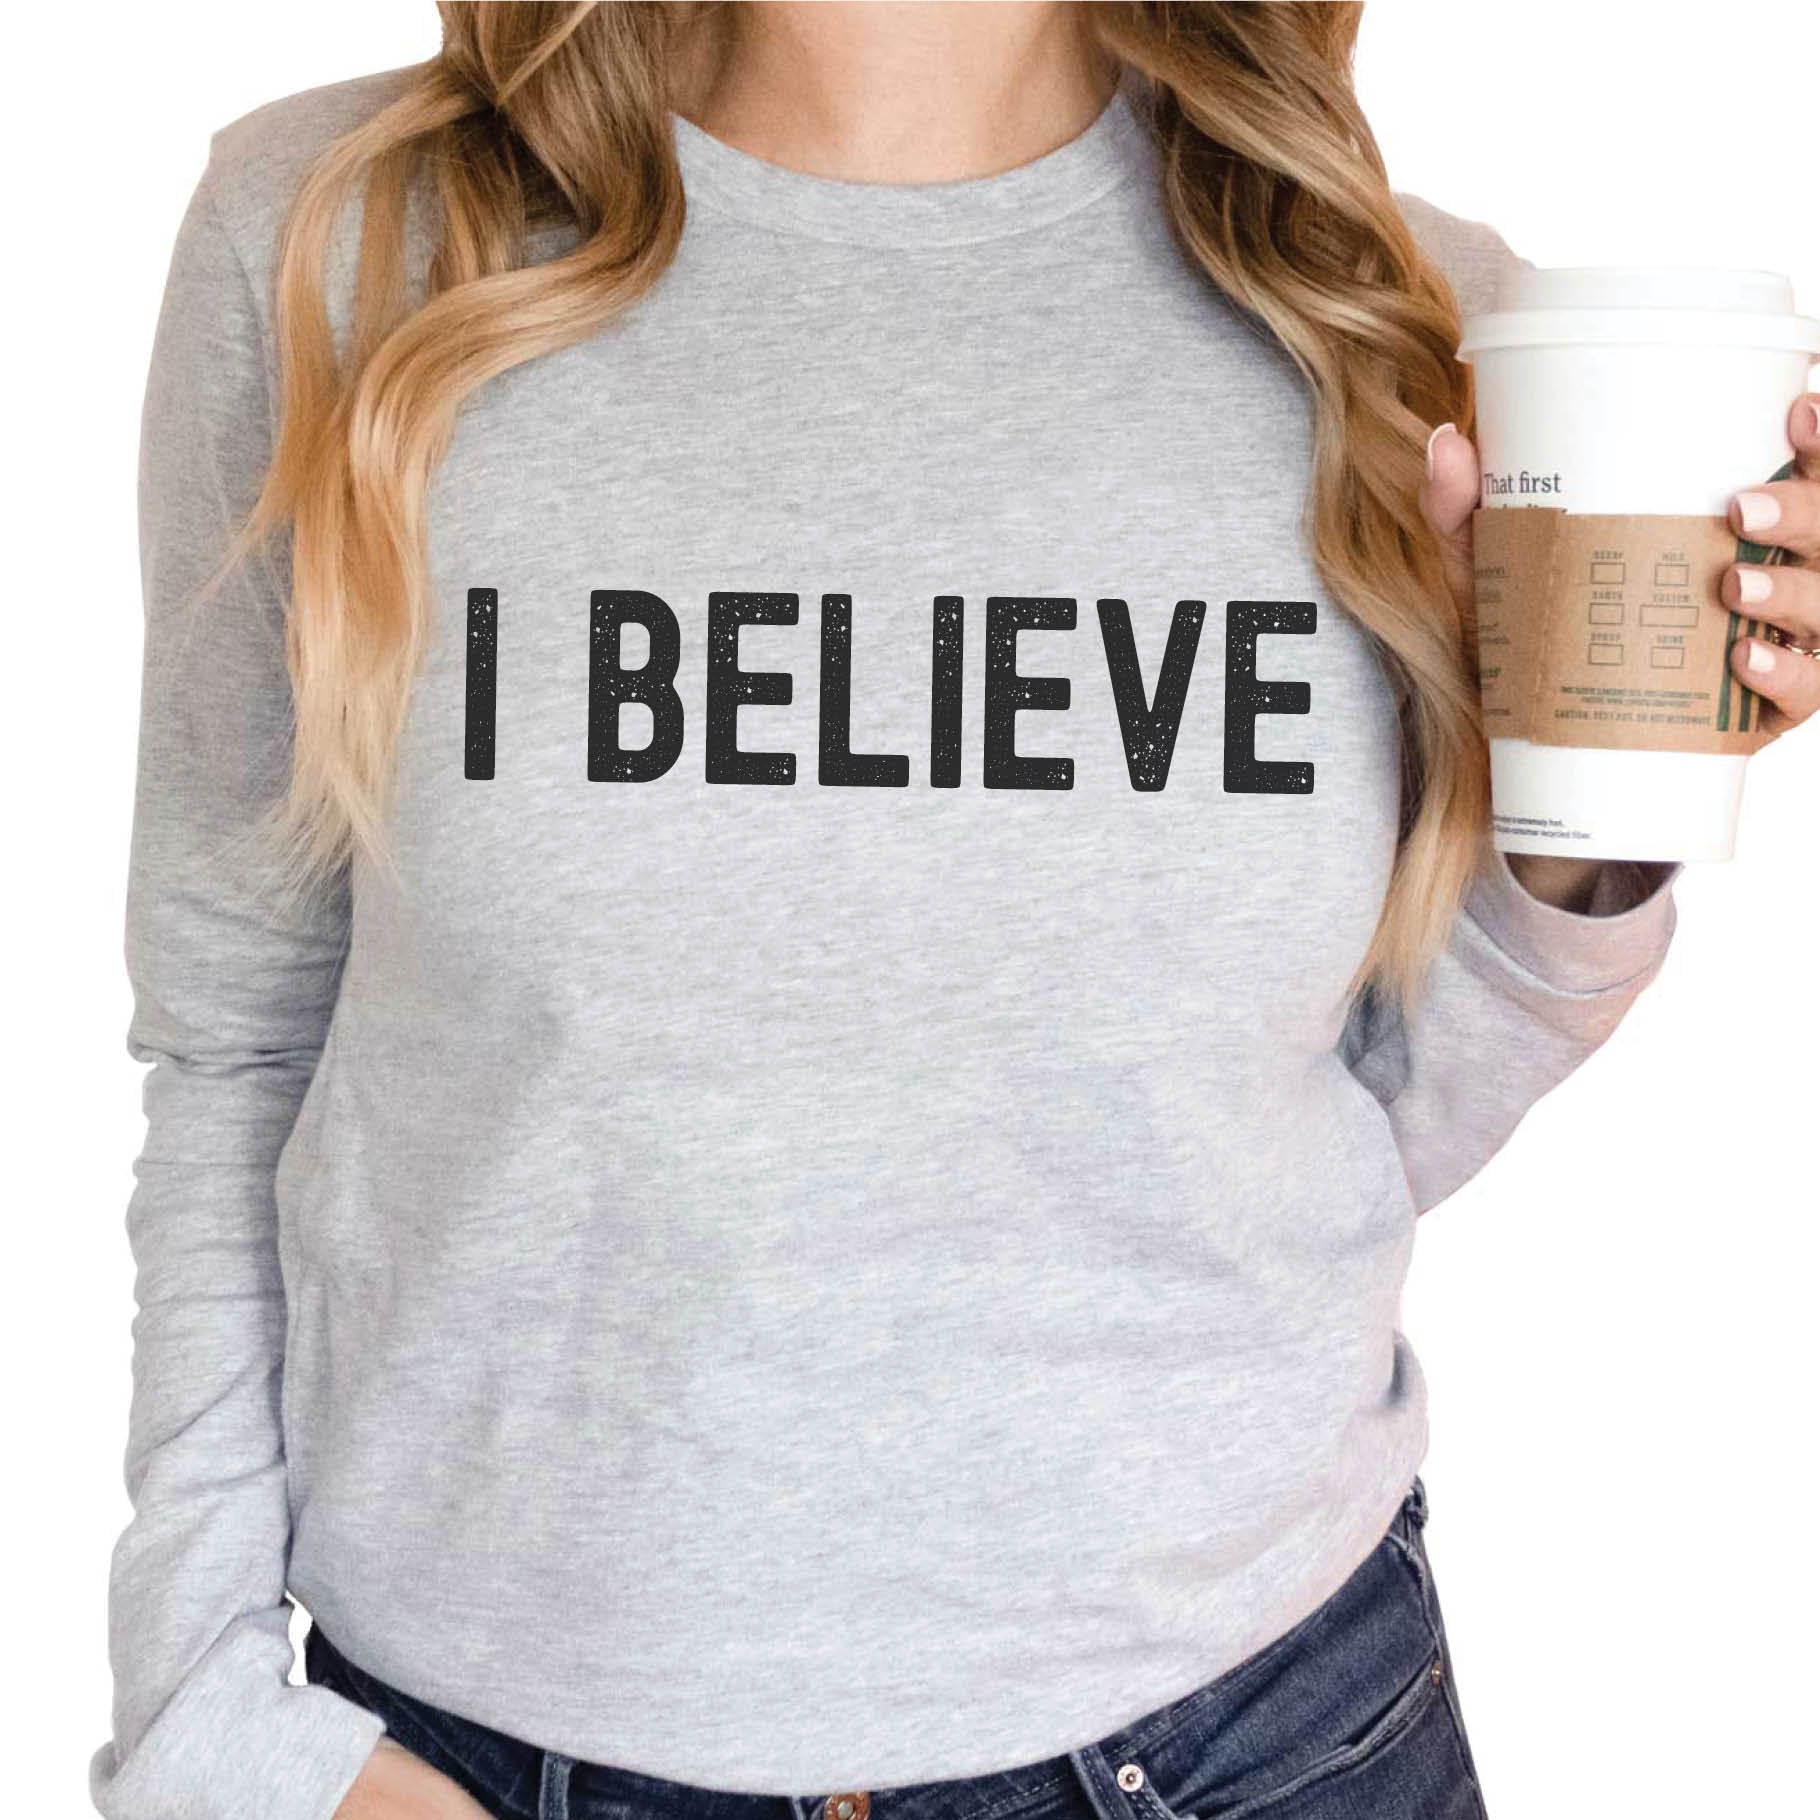 Coffee drinking woman wearing a heather gray cozy long sleeve t-shirt with a bold faith-based statement "I BELIEVE" distressed typography design printed in black, created for Christian men and women Jesus believers